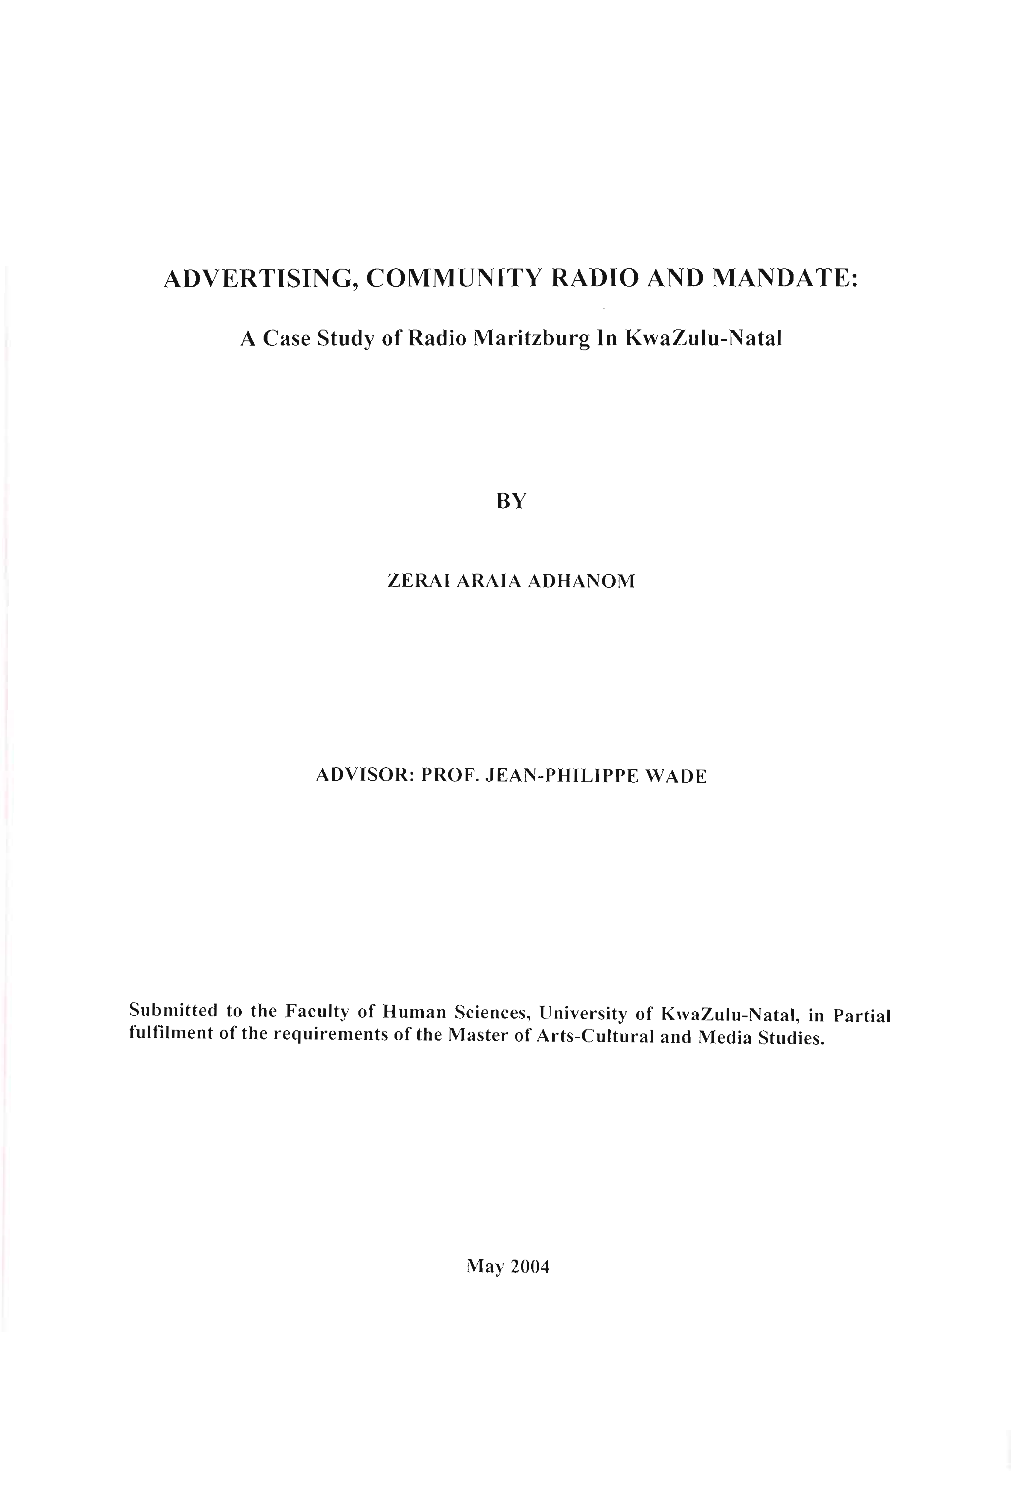 Advertising, Community Radio and Mandate: By